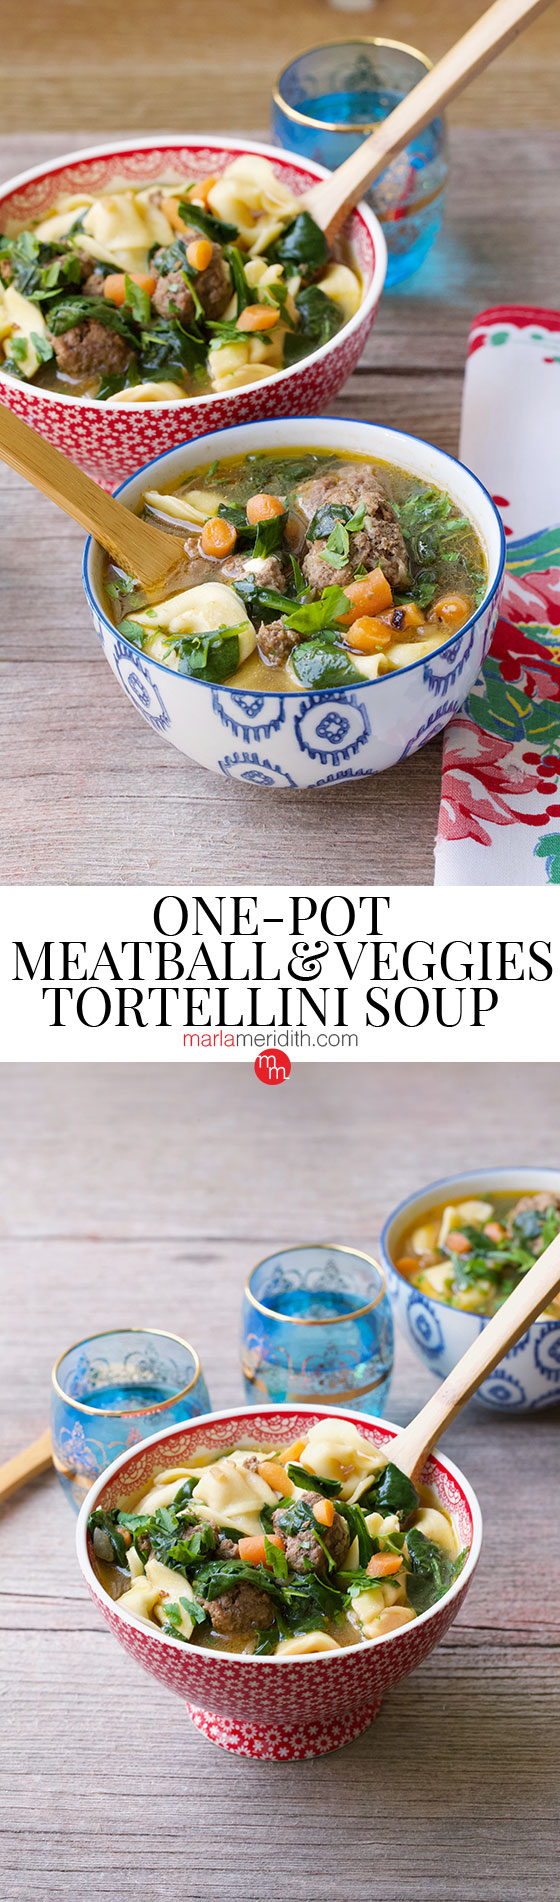 One-Pot Meatball & Veggies Tortellini Soup recipe, healthy and delicious! MarlaMeridith.com